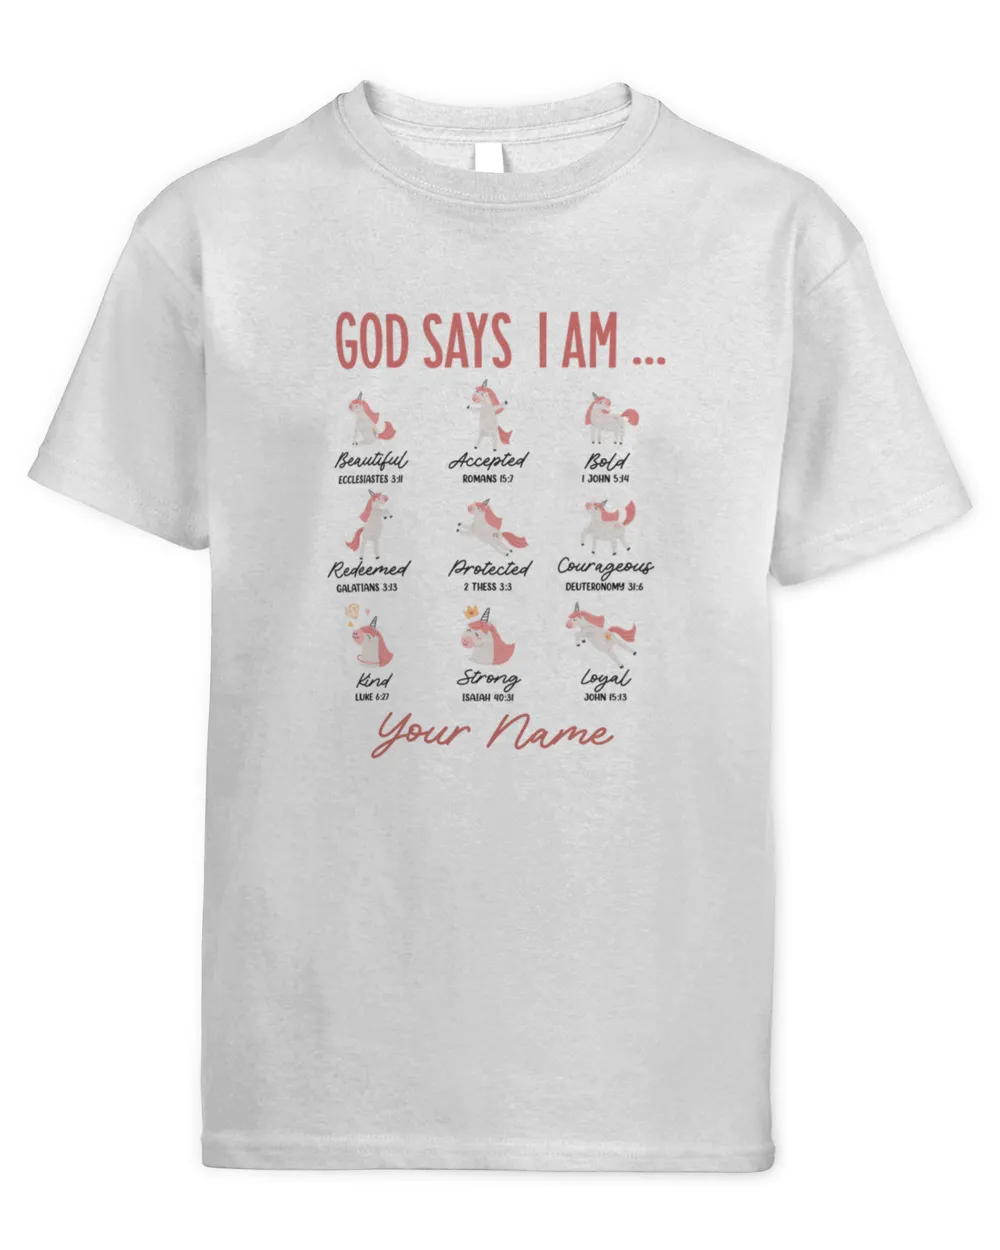 Personalized T-shirt For Kid - God Says I Am - Personalized Gift For Kid